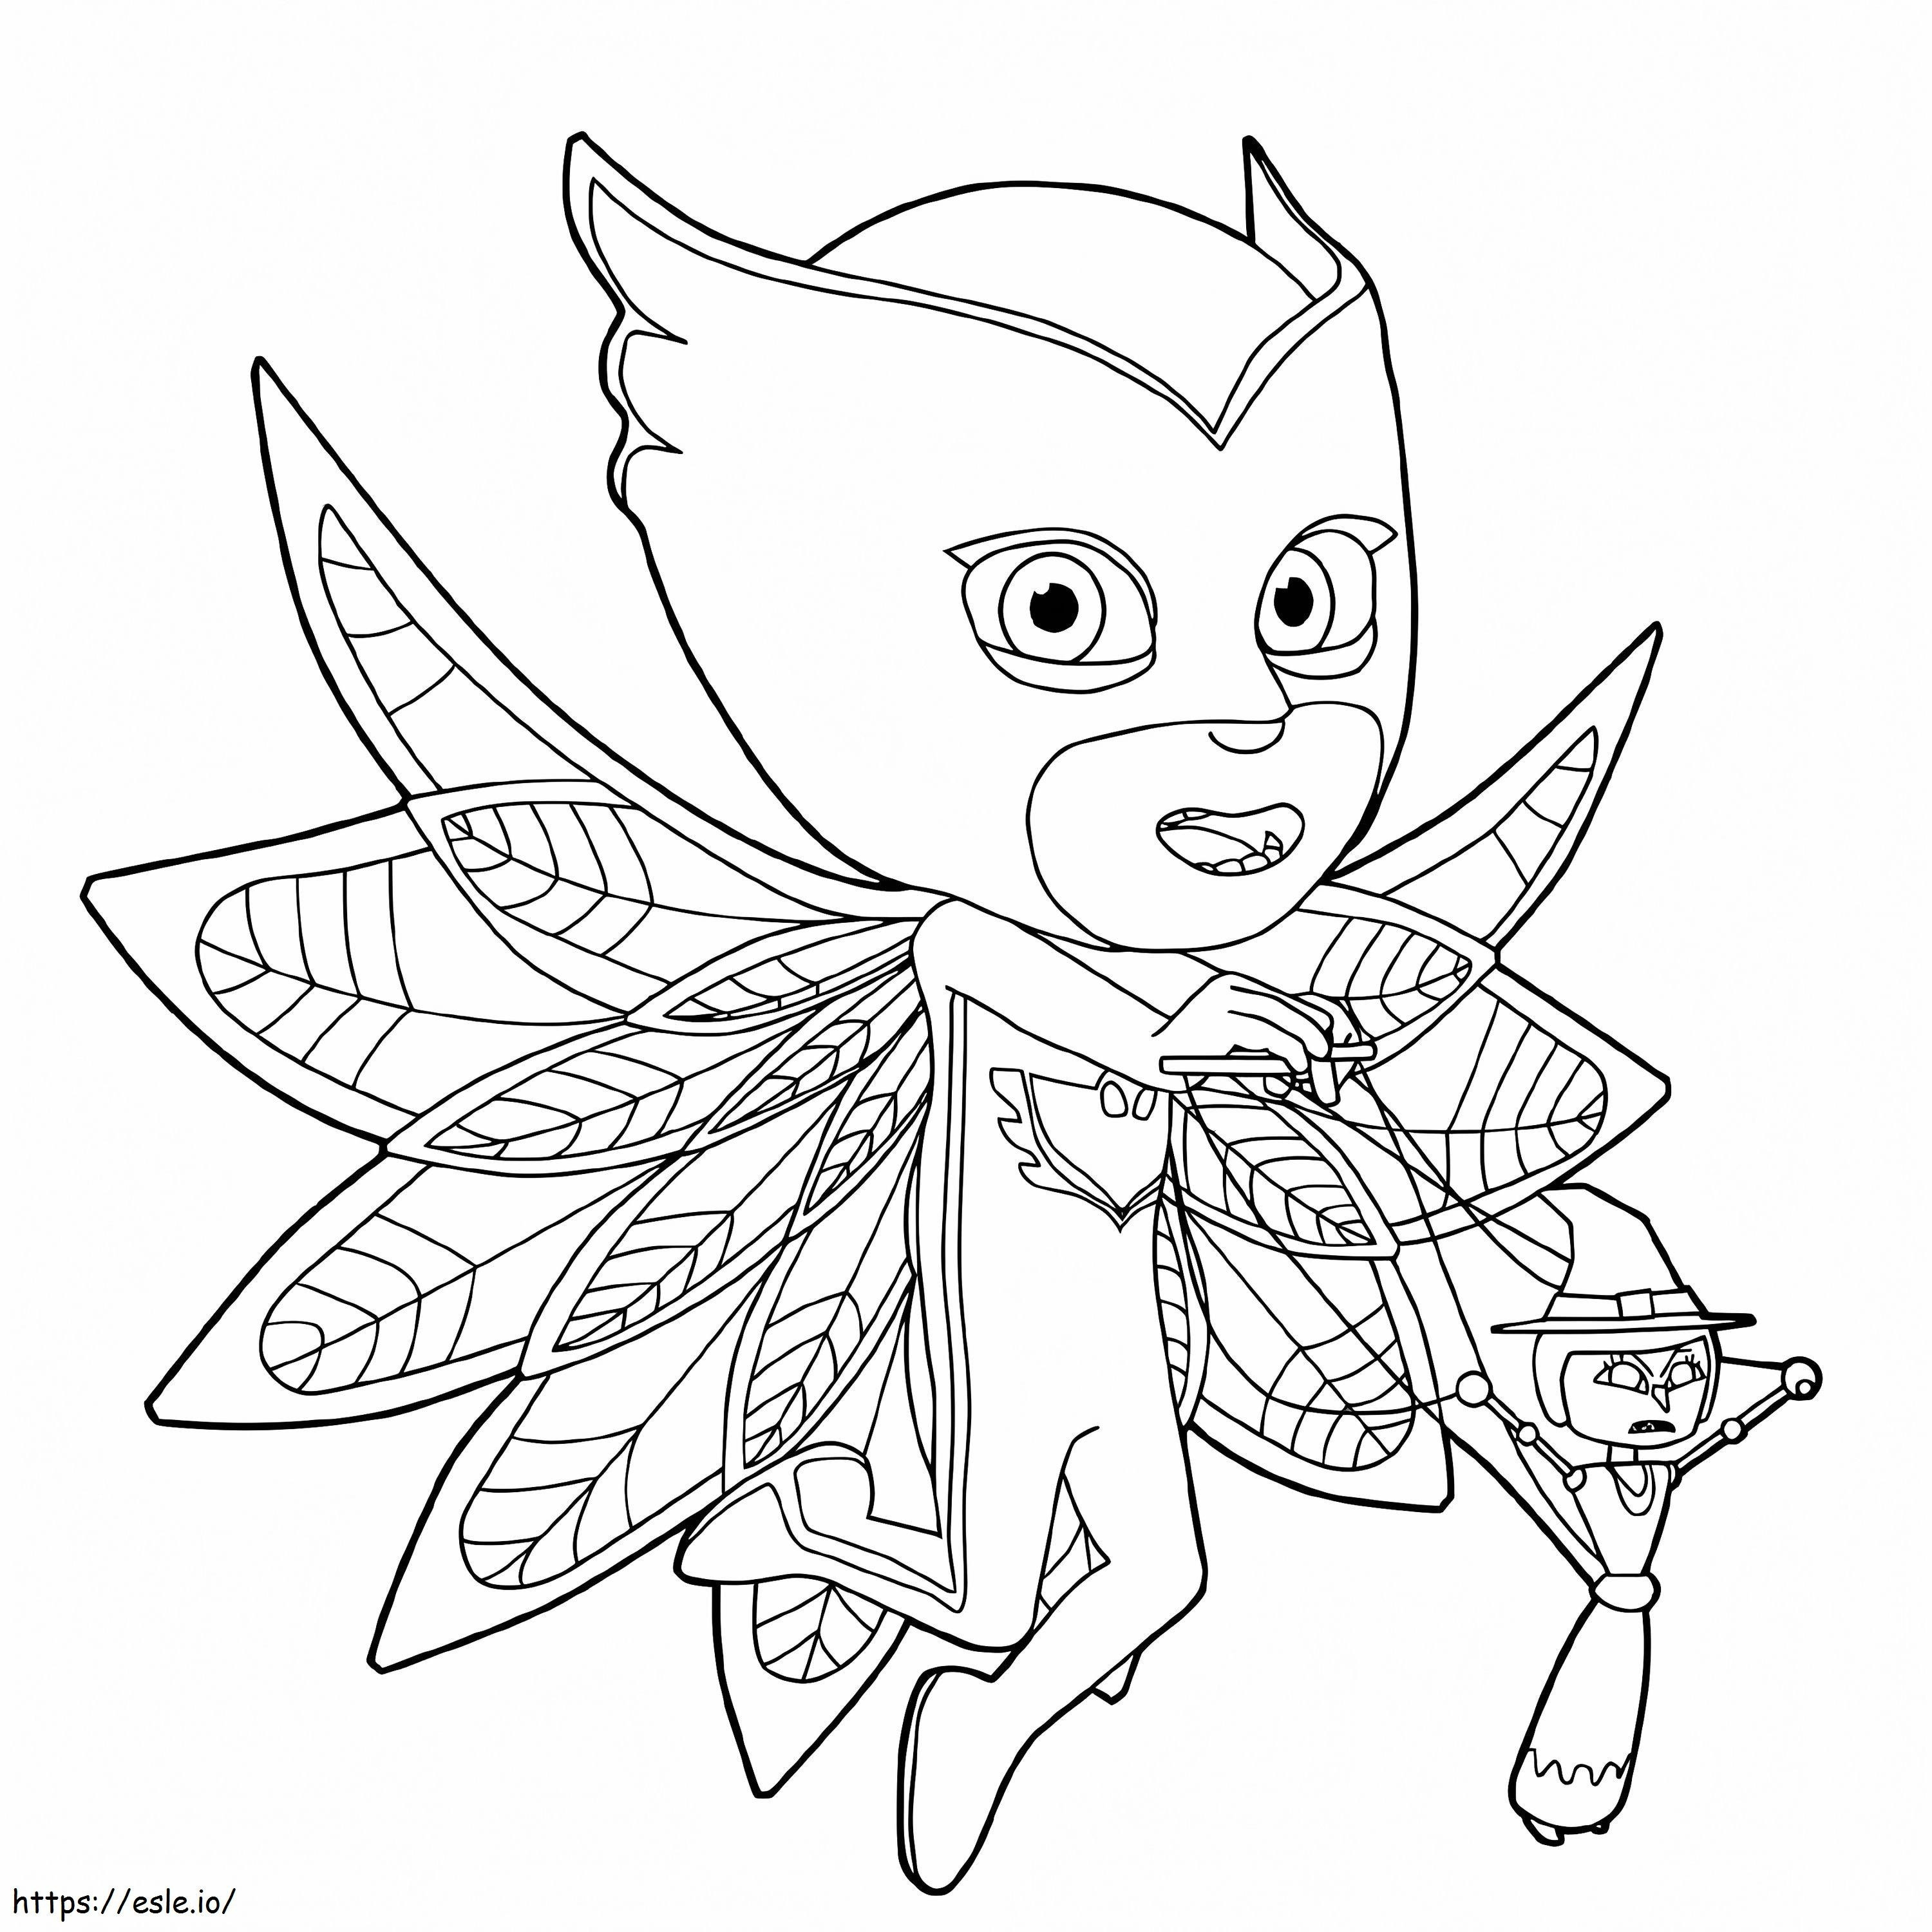 Owlette And Toy coloring page